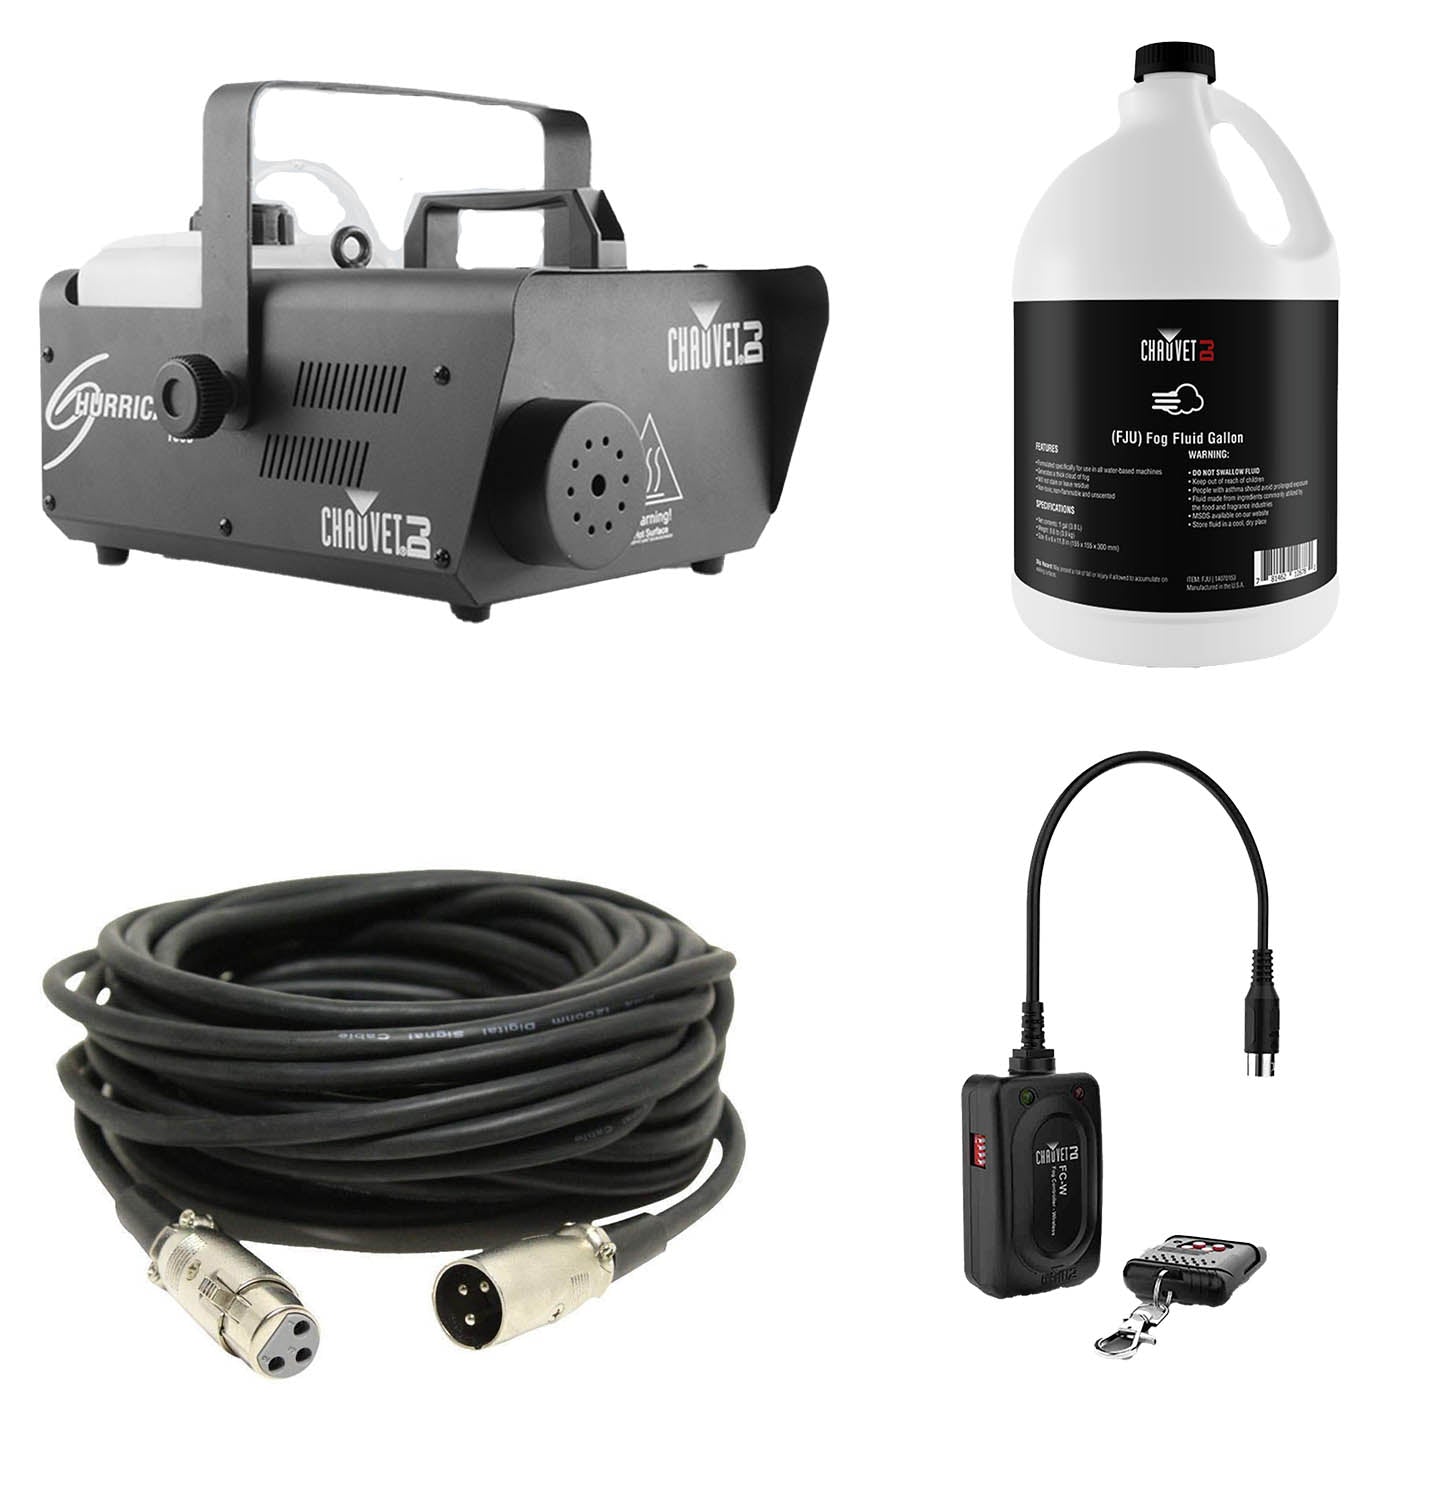 Chauvet DJ Fog Machine Package with Wireless Remote, Fluid Gallon and DMX Cable - Hollywood DJ